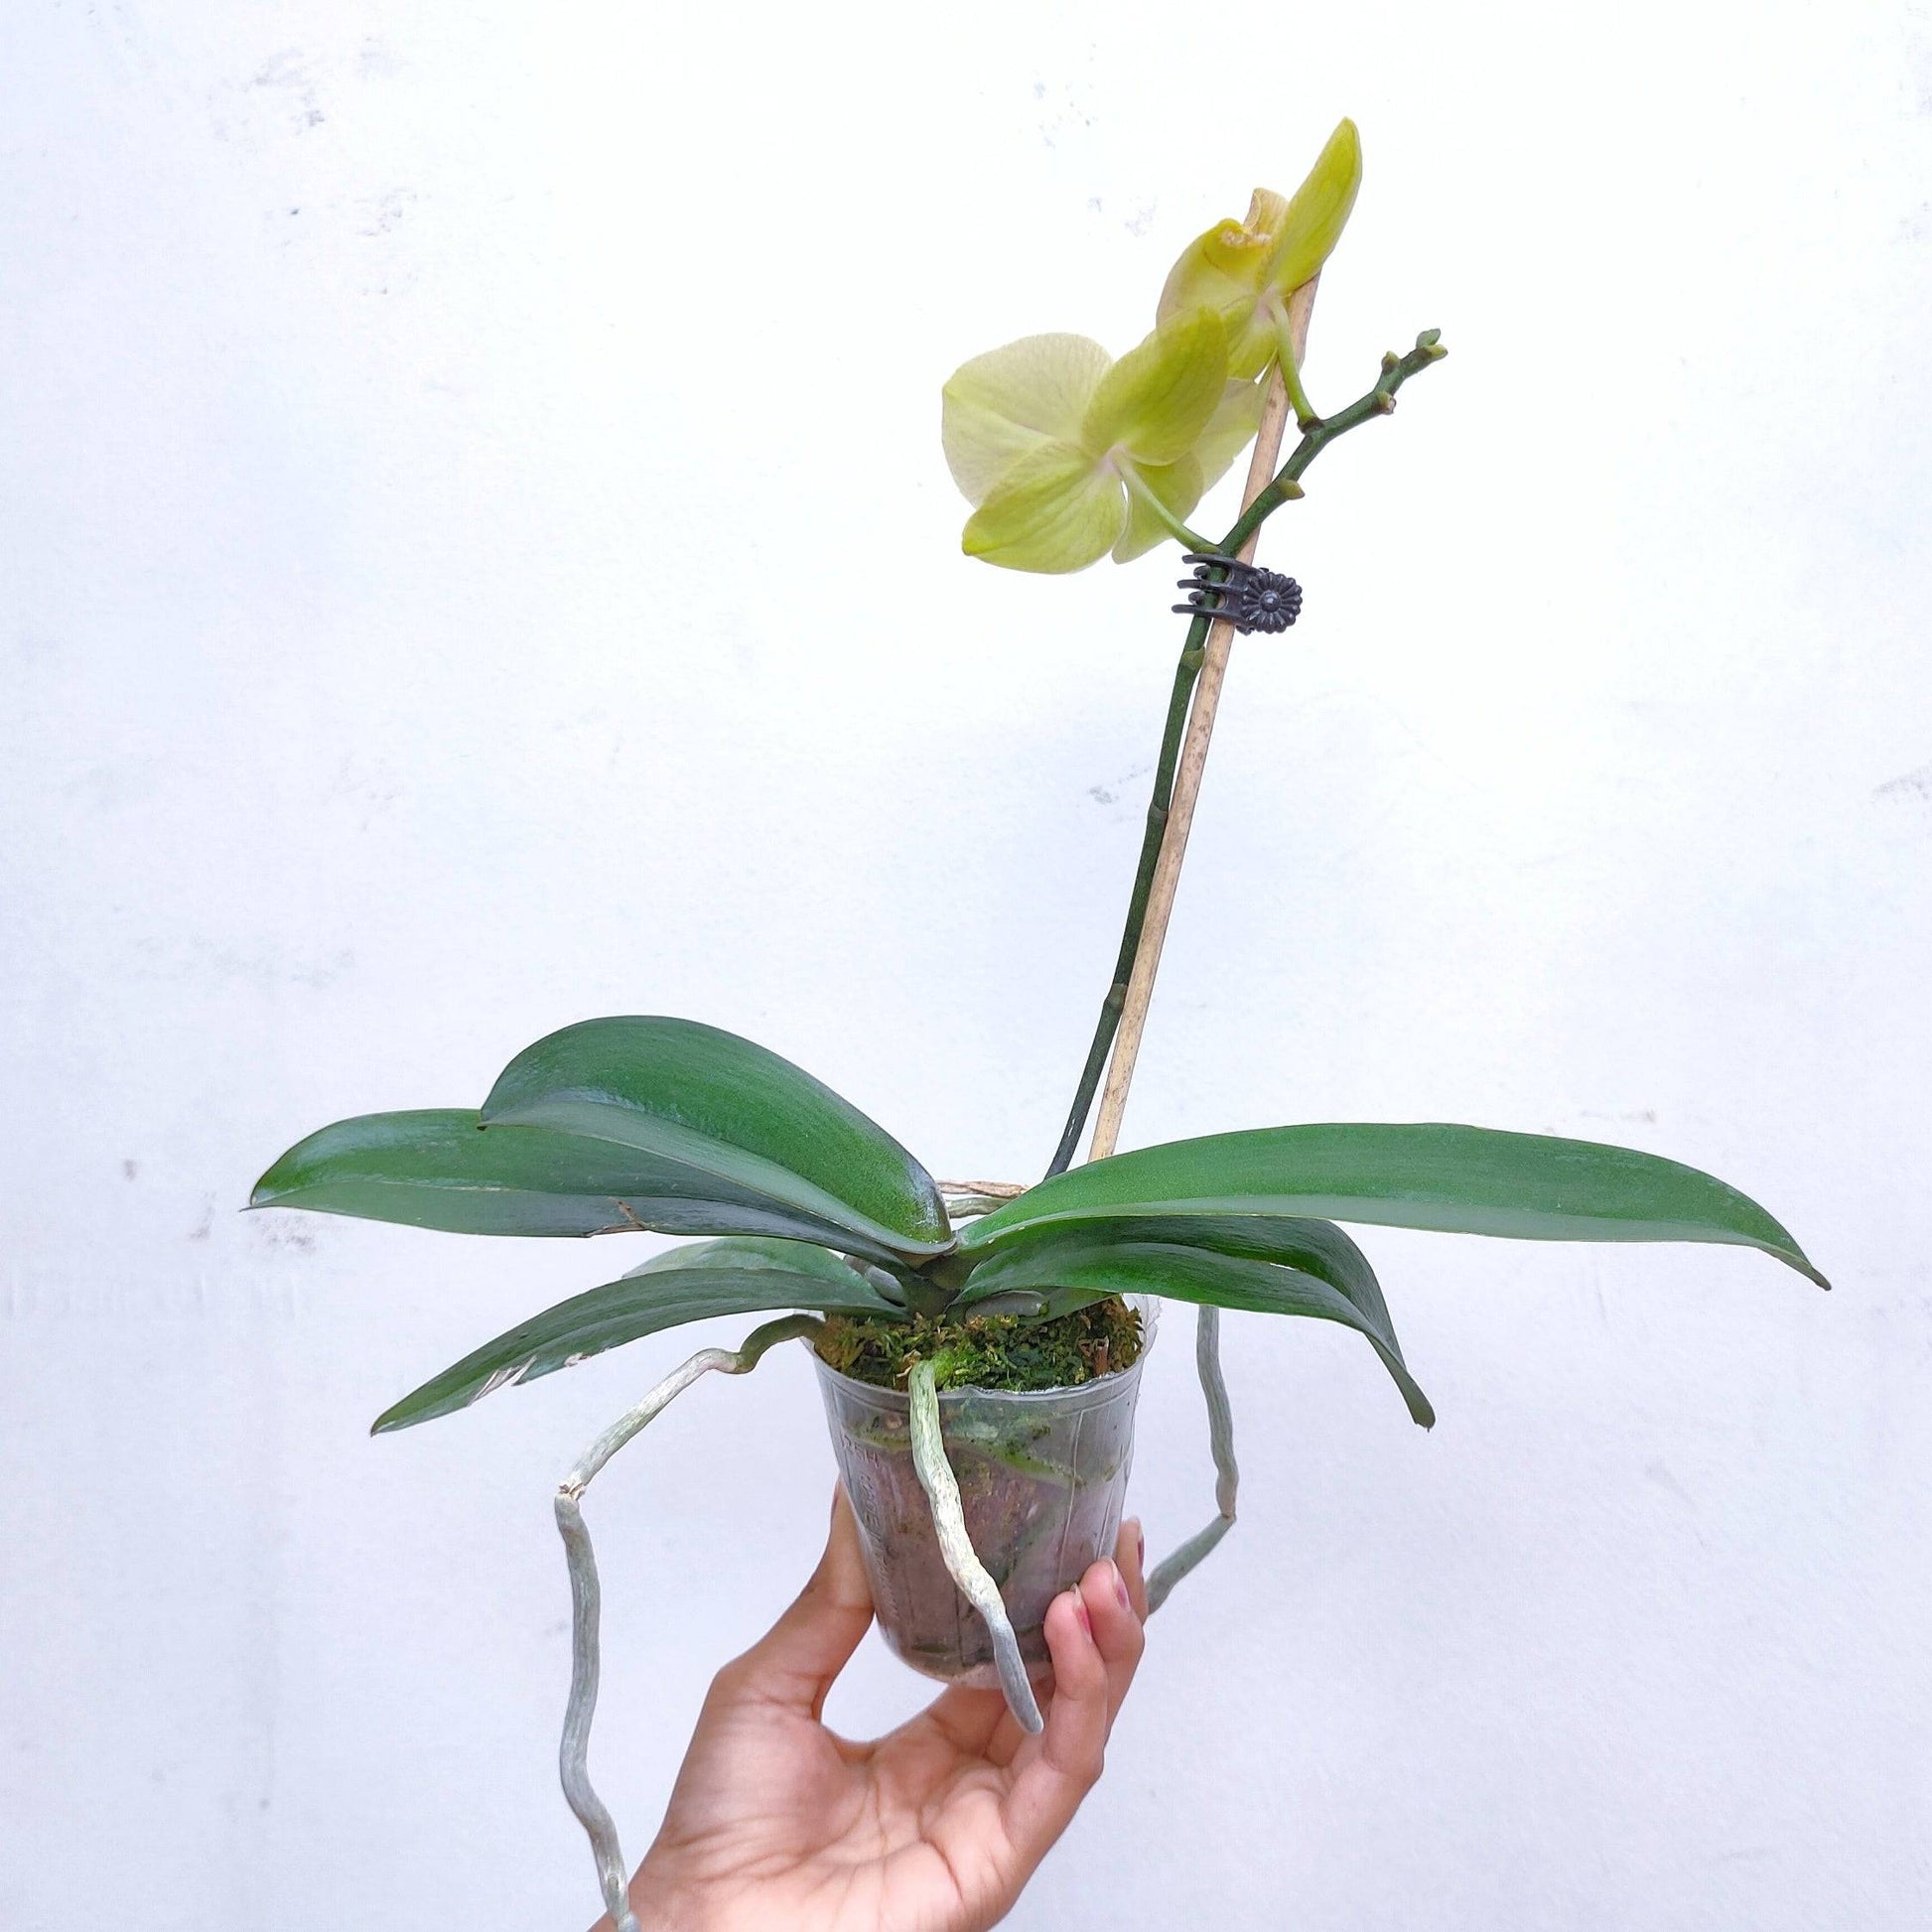 Phalaenopsis Crack of Dawn - Without Flowers | BS - Buy Orchids Plants Online by Orchid-Tree.com